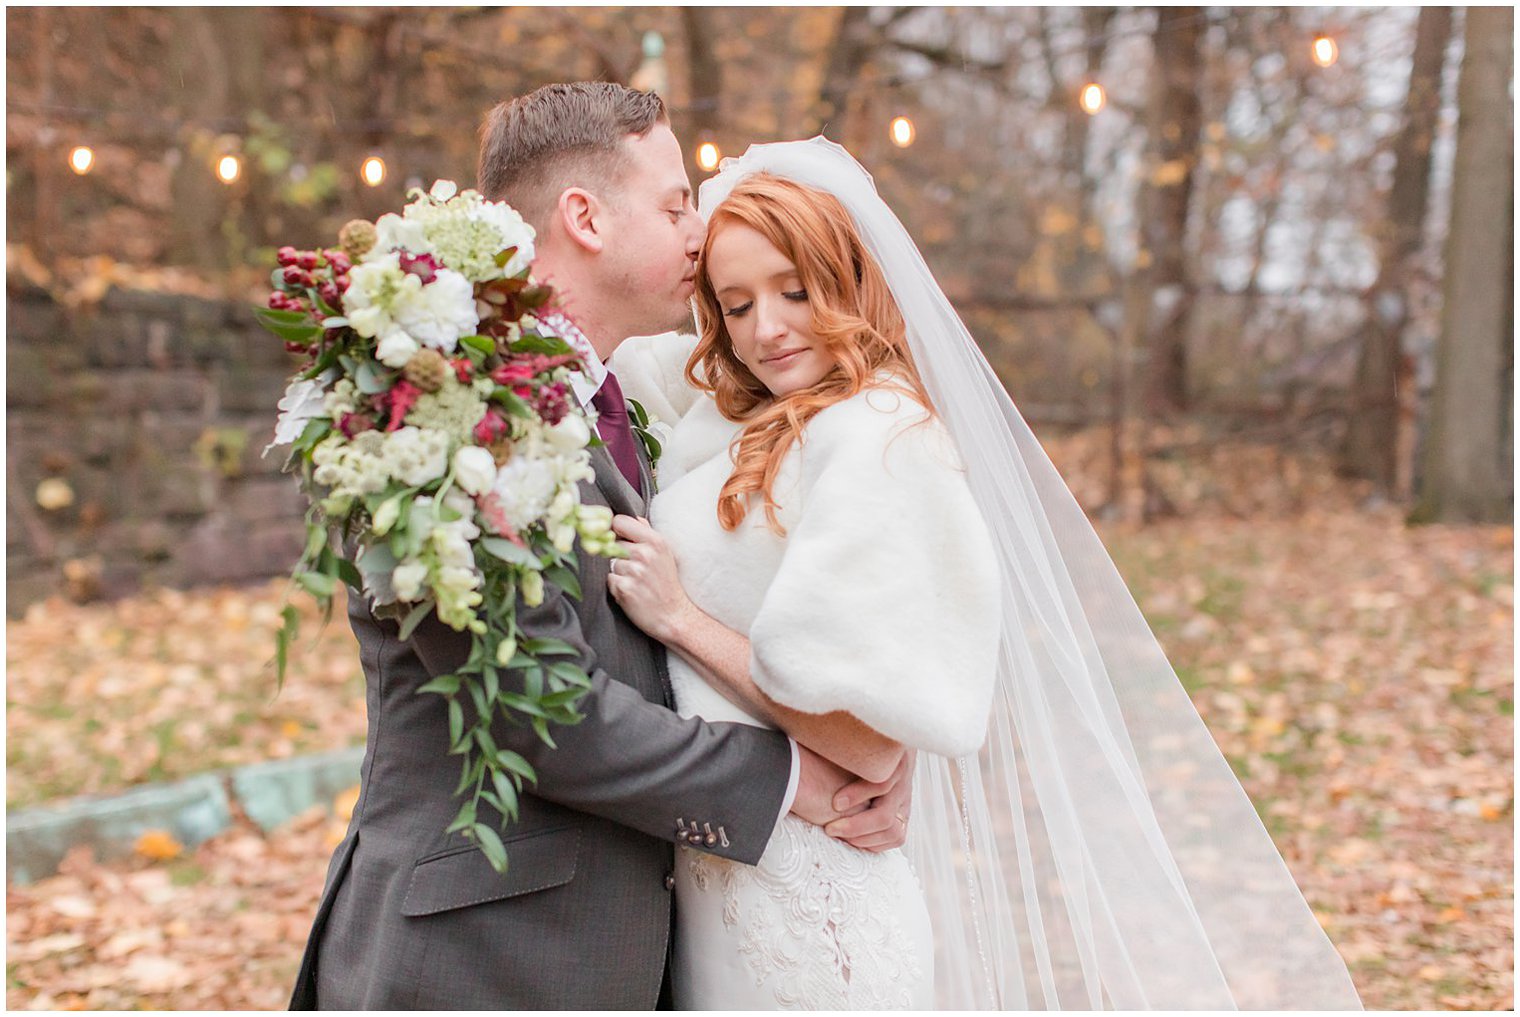 groom nuzzles bride's forehead during winter wedding portraits in New Jersey